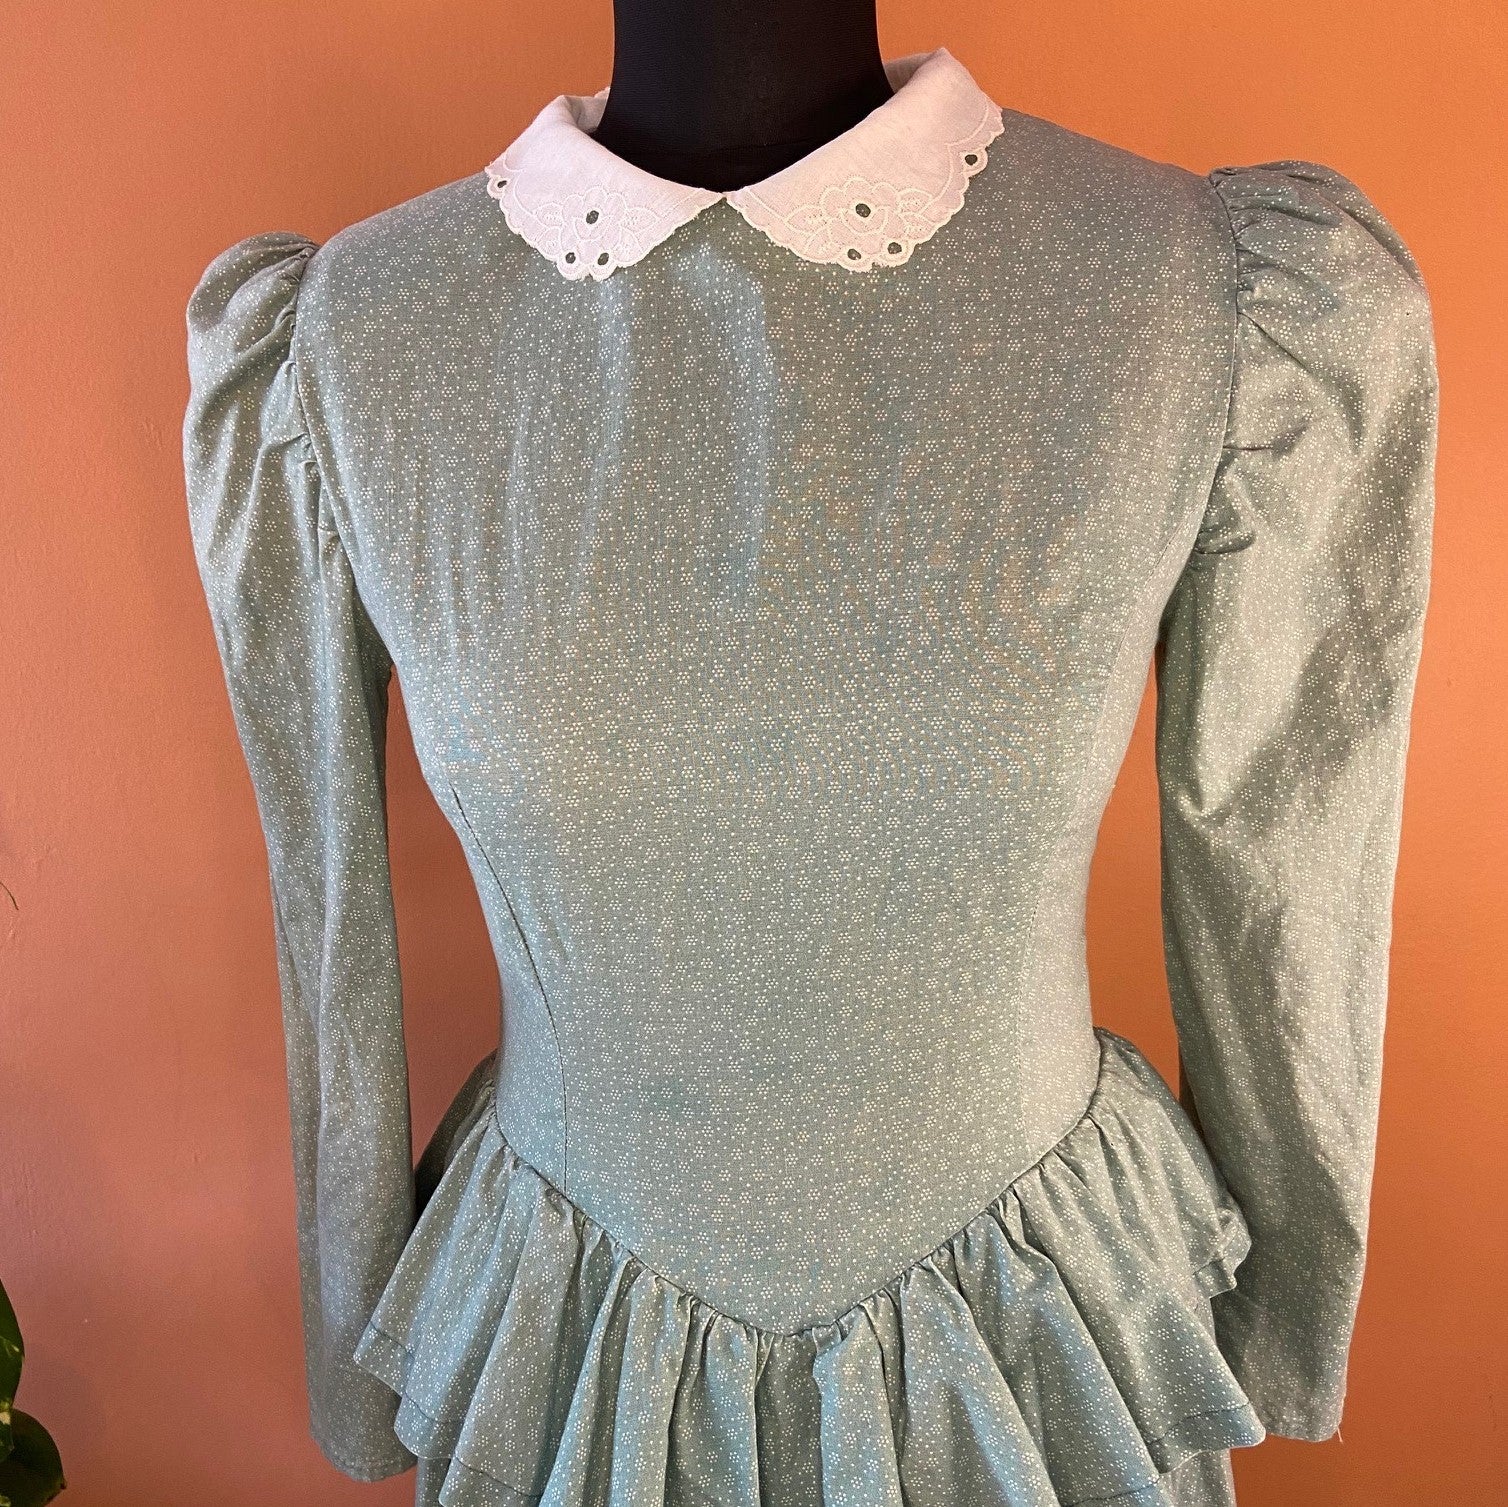 Vintage green dress with puff sleeves